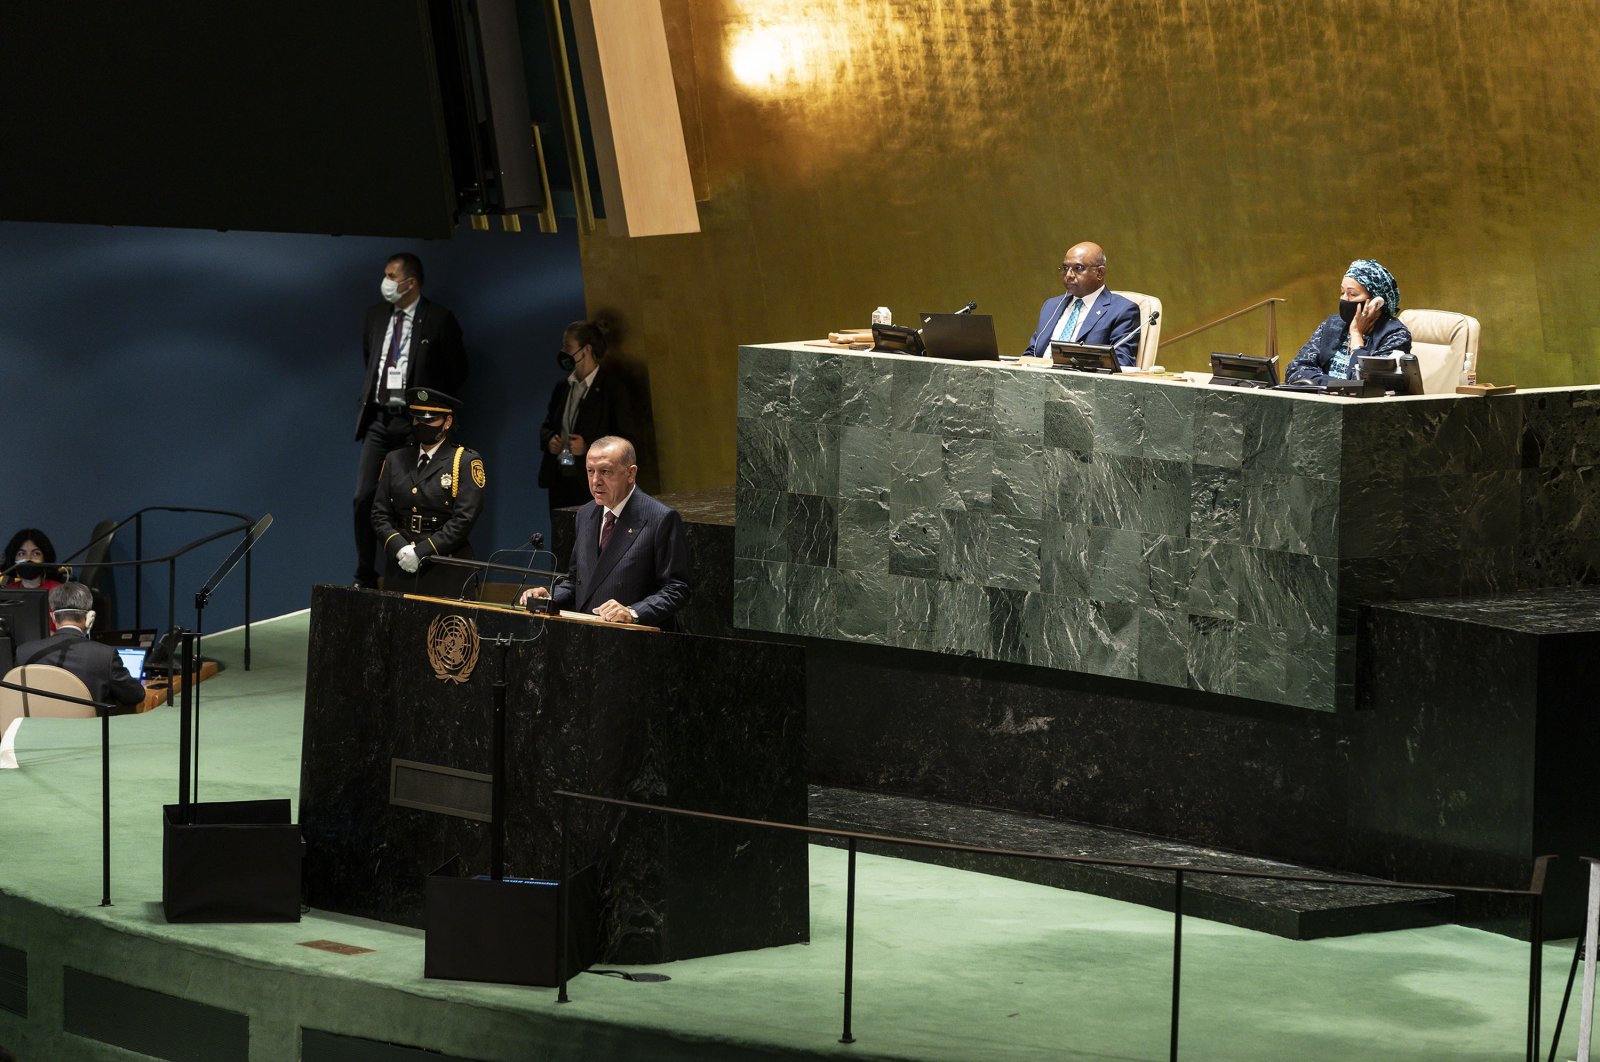 President Recep Tayyip Erdoğan speaks during the 76th Session of the General Assembly at U.N. Headquarters in New York, U.S., Sept. 21, 2021. (Getty Images)